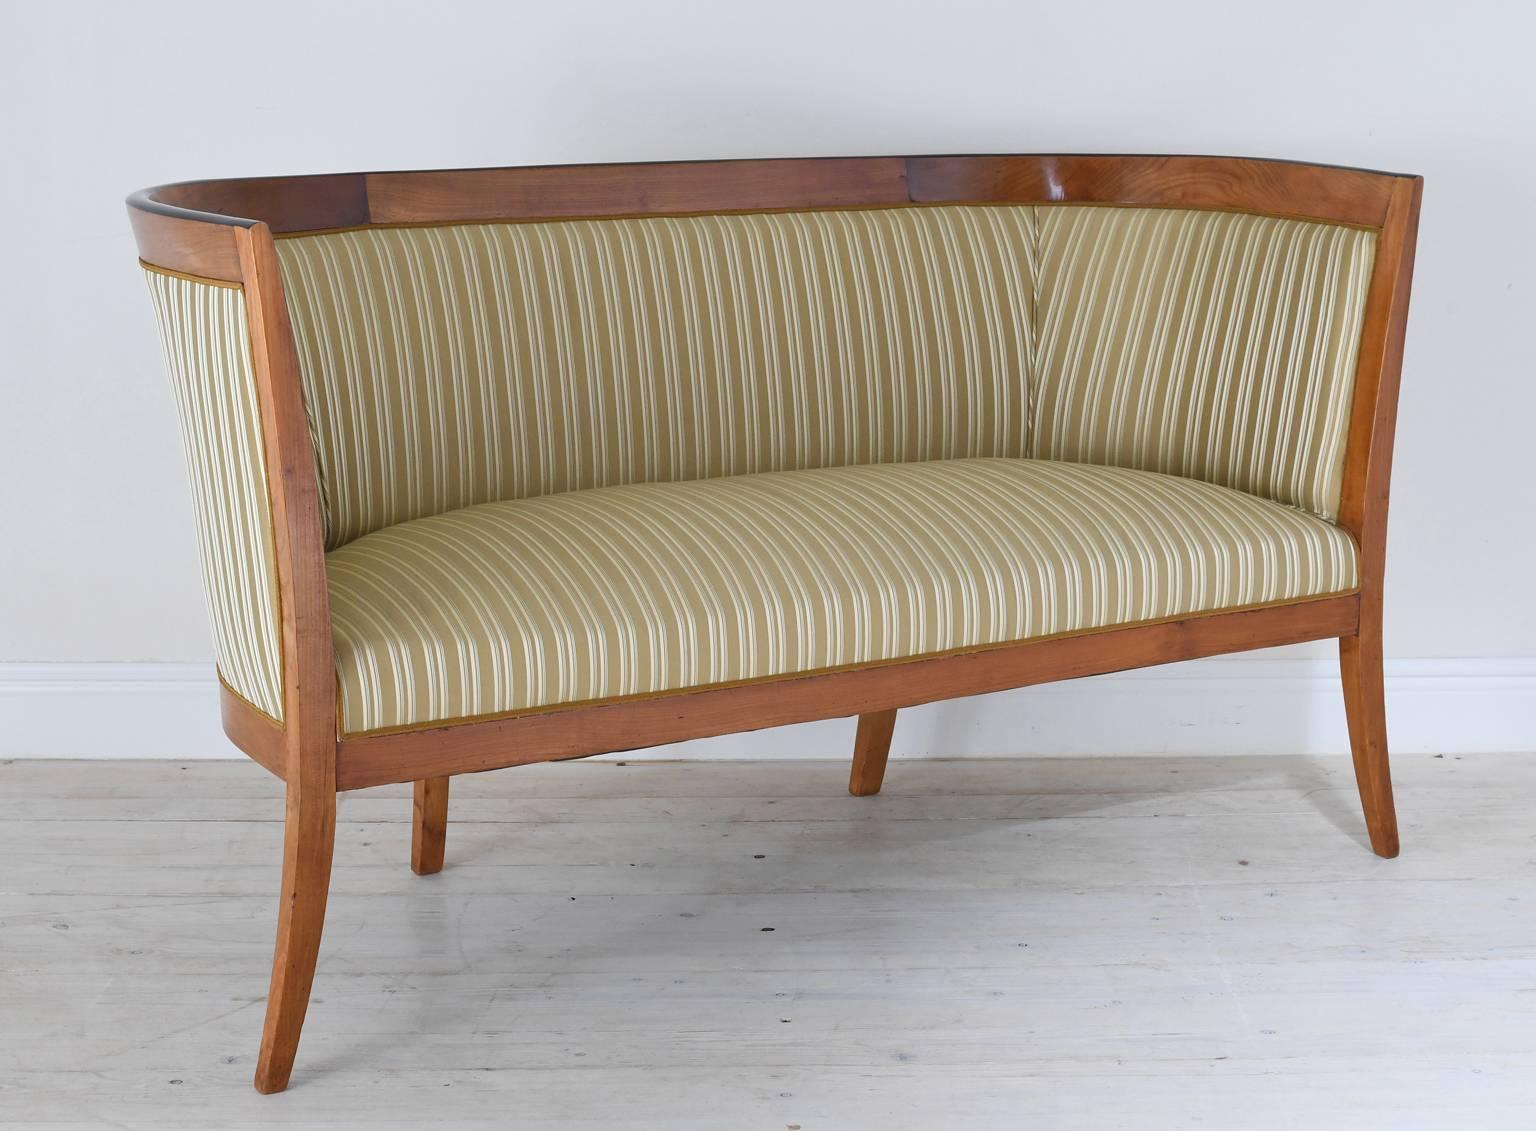 The clean Silhouette contributes to the notably understated elegance of this fine, early Viennese Biedermeier canape or settee. The cherry wood frame has an ebonized banding at the top of the crest rail subtly highlighting the sumptuous curve of the